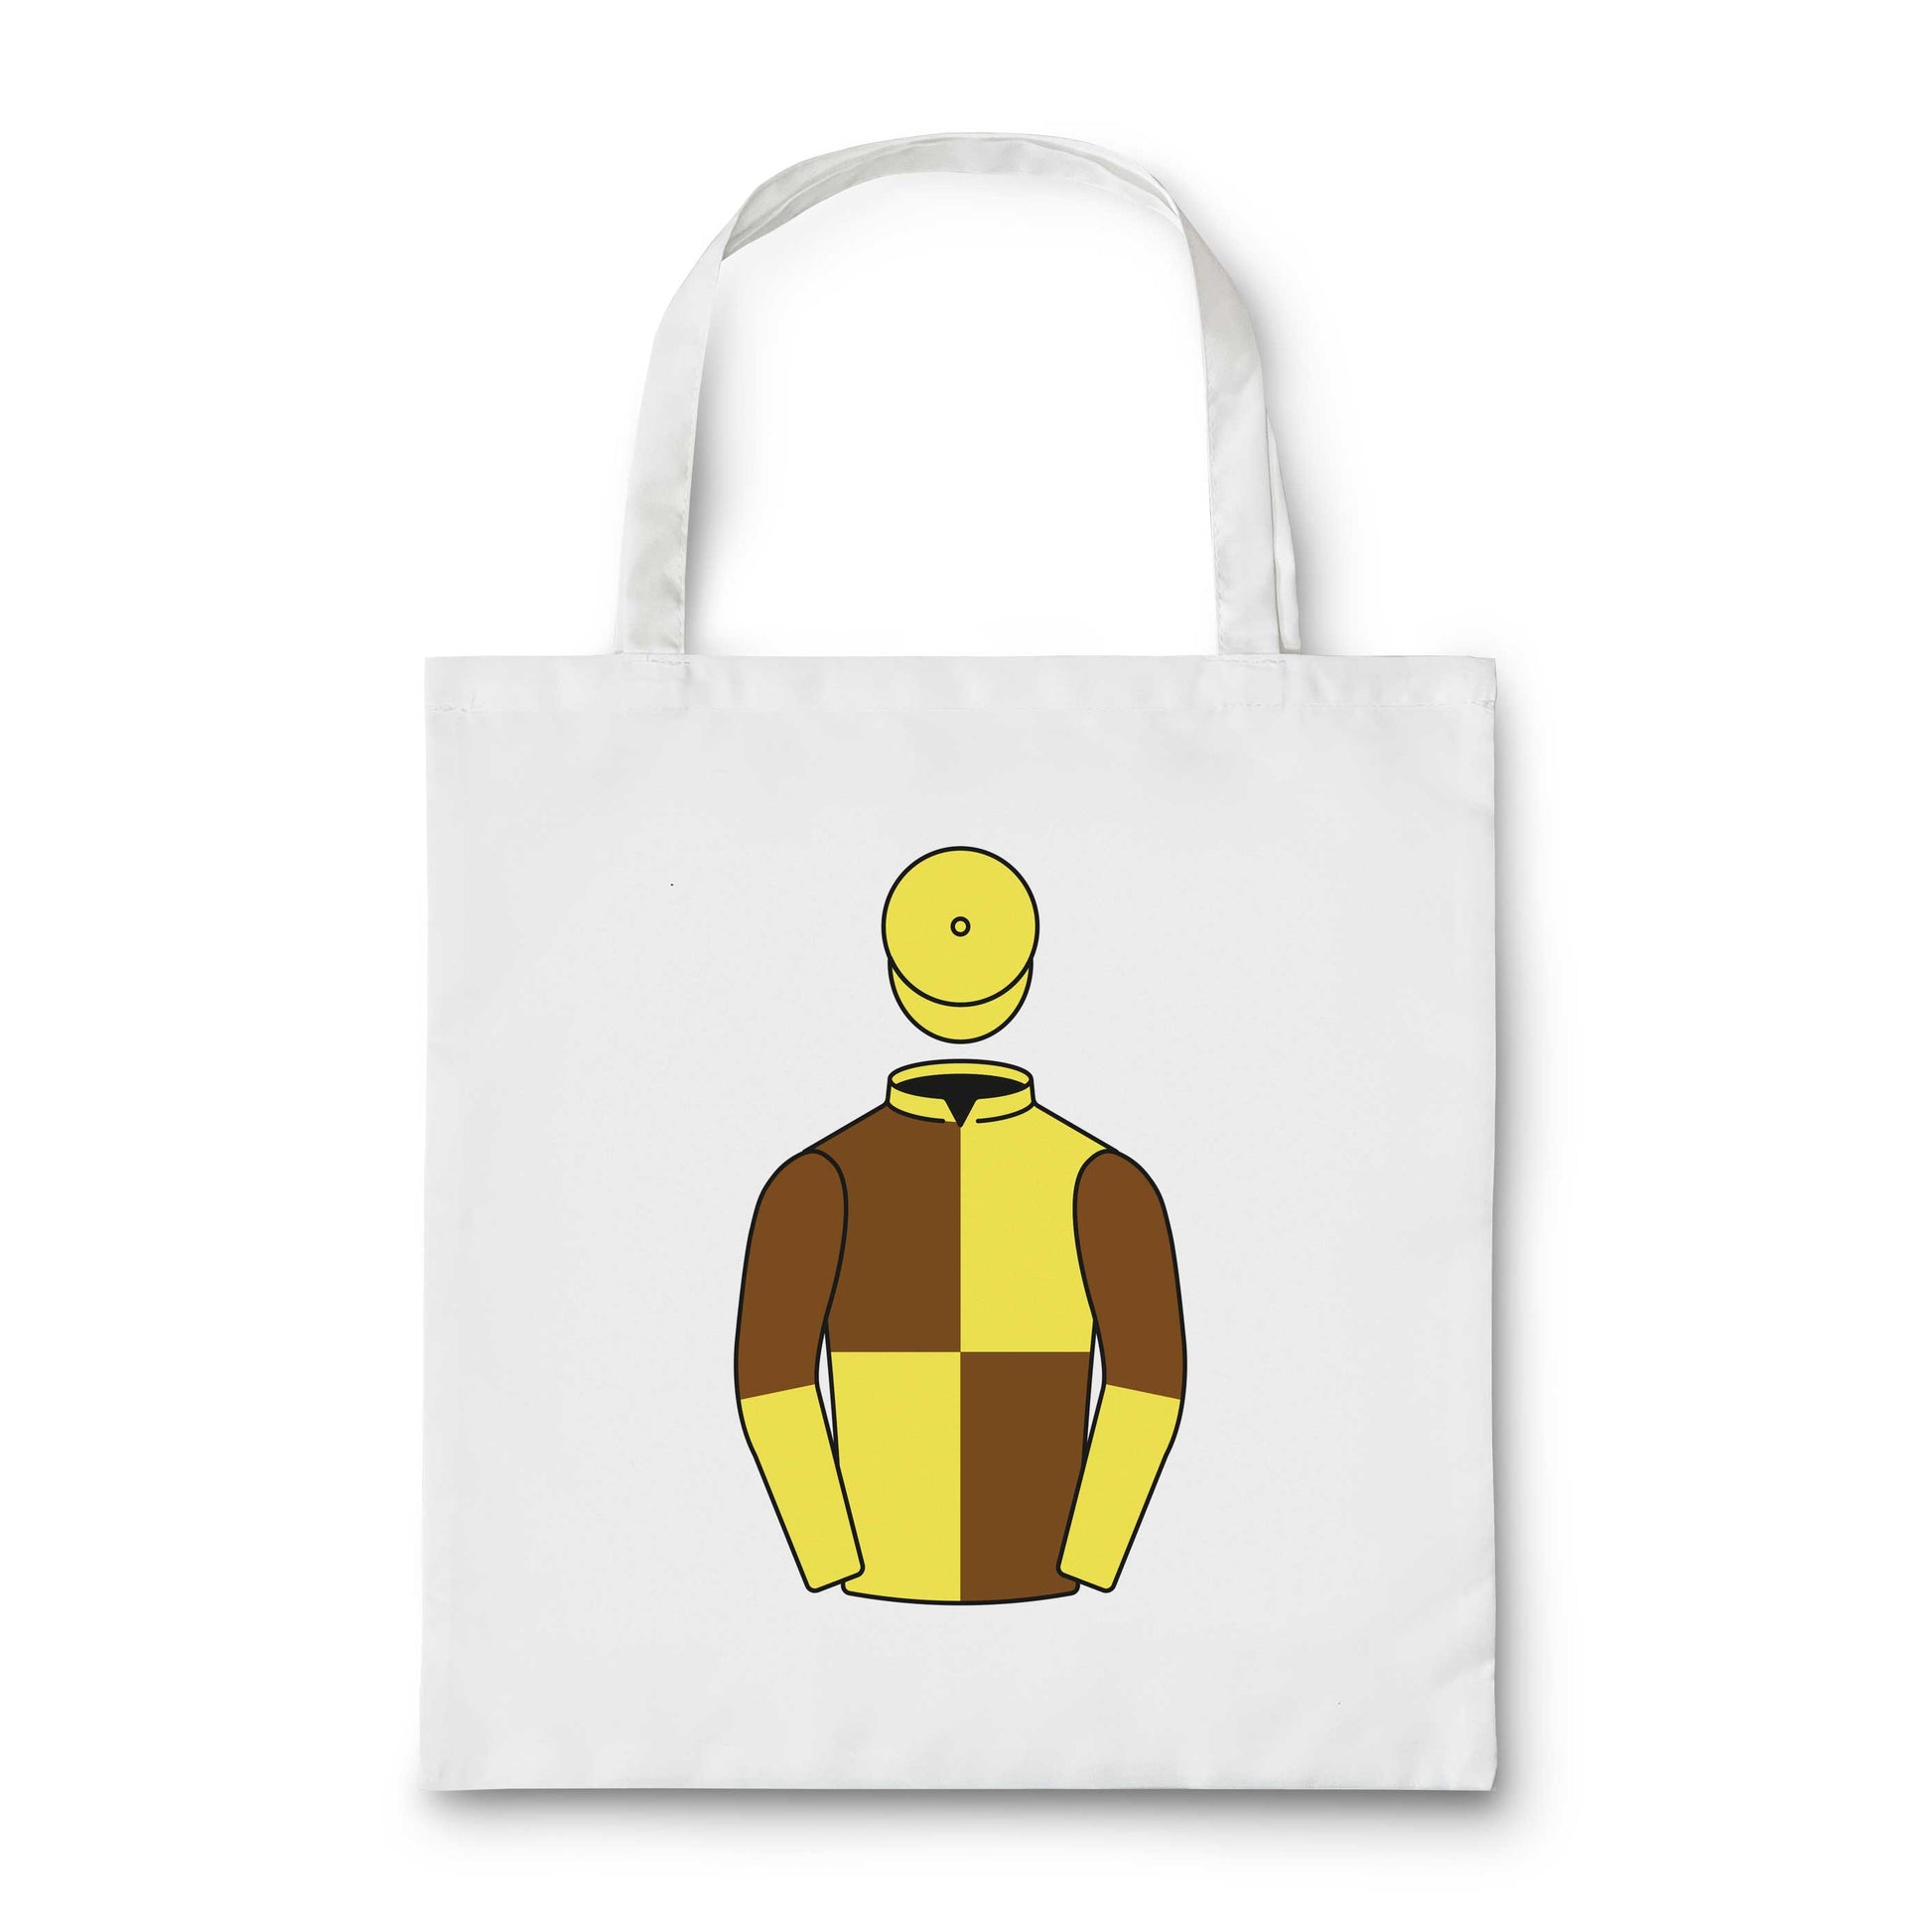 Mrs Audrey Turley Tote Bag - Tote Bag - Hacked Up